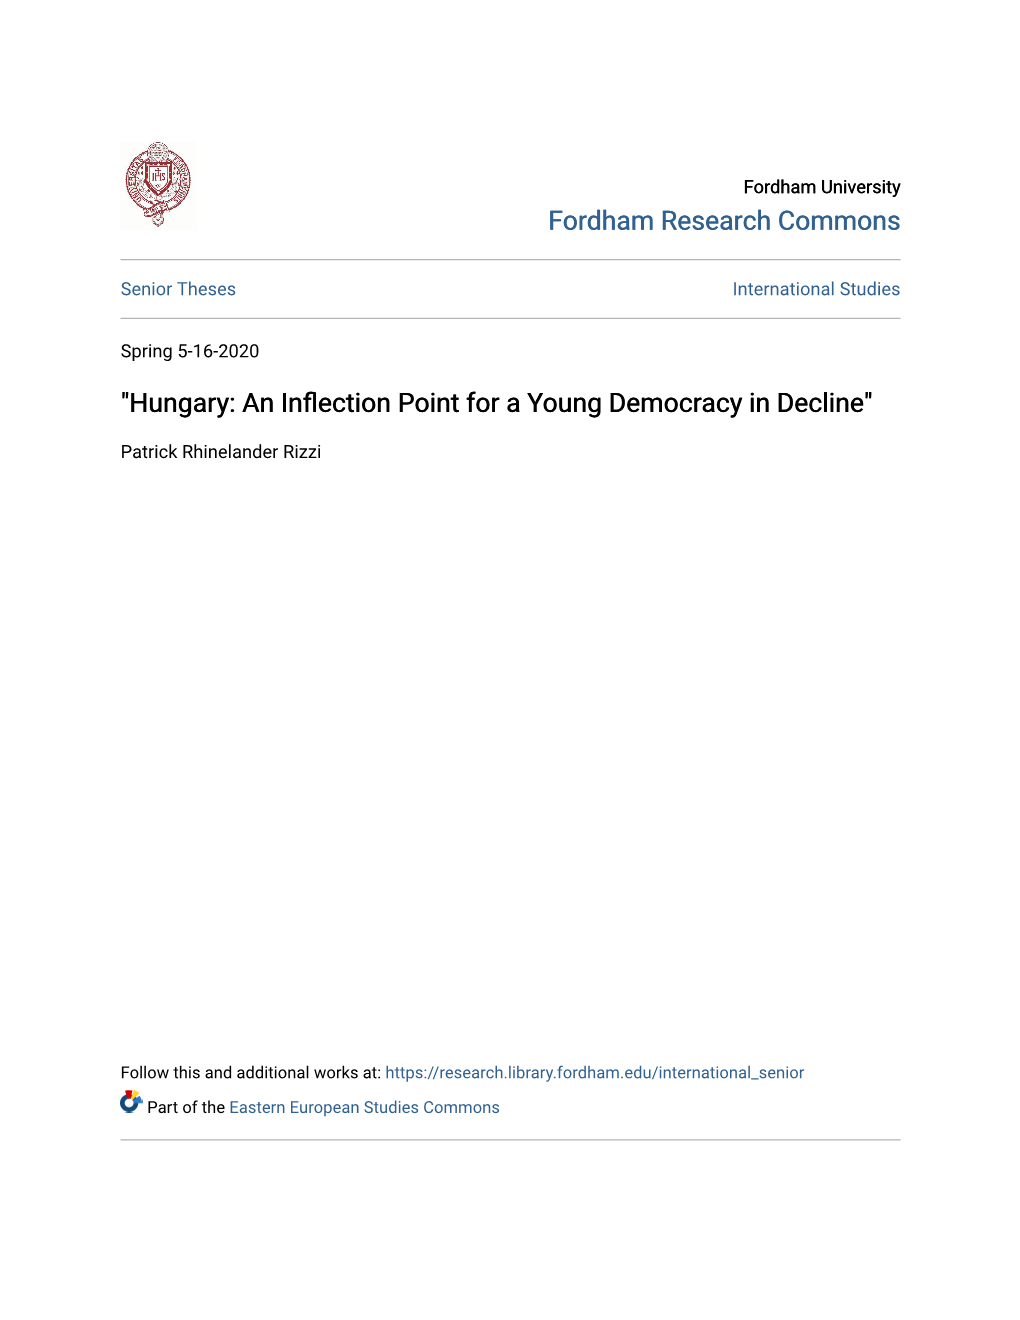 "Hungary: an Inflection Point for a Young Democracy in Decline"